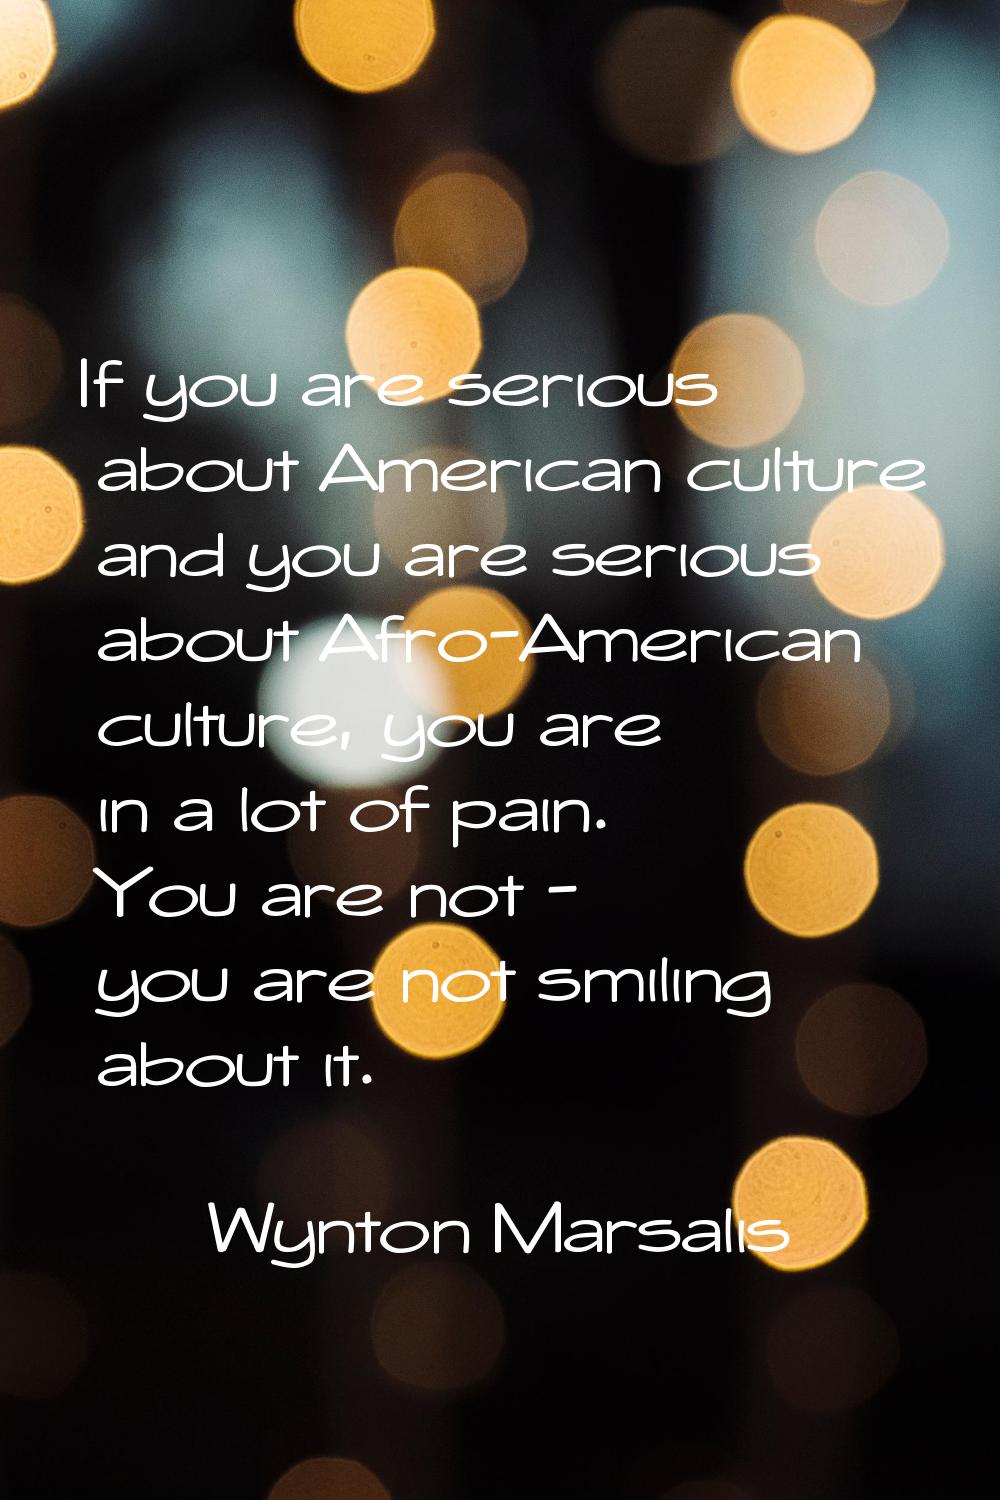 If you are serious about American culture and you are serious about Afro-American culture, you are 